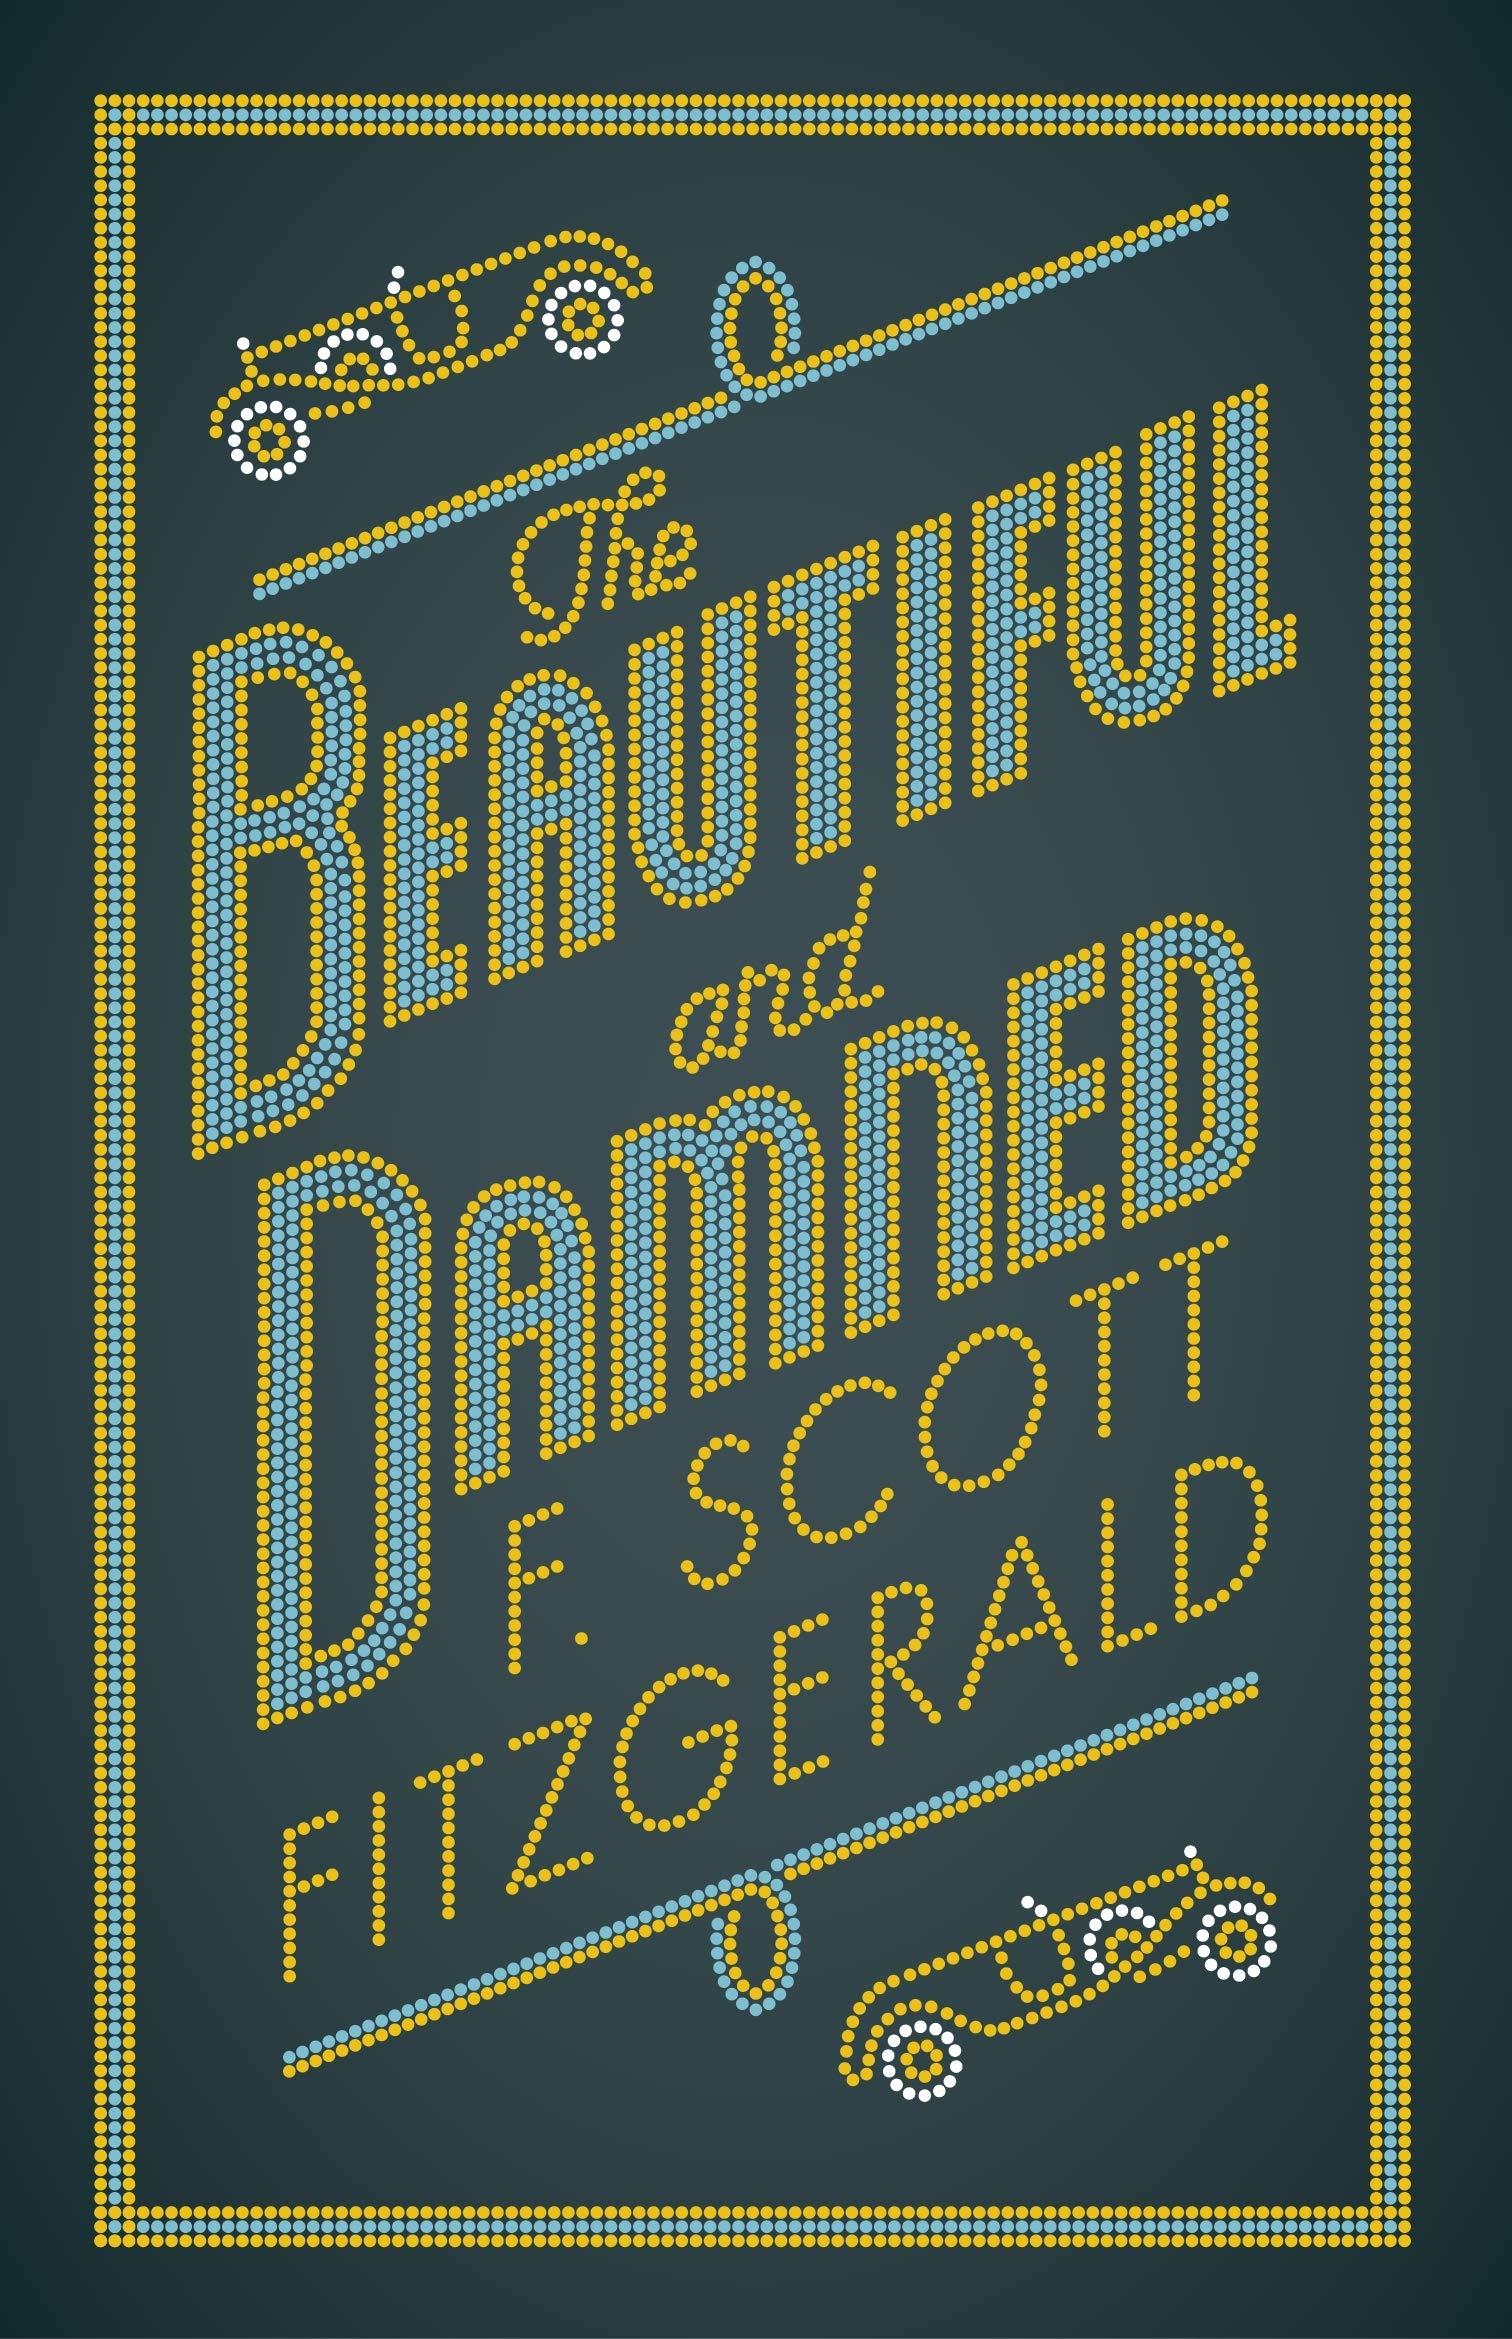 The Beautiful and Damned | F. Scott Fitzgerald